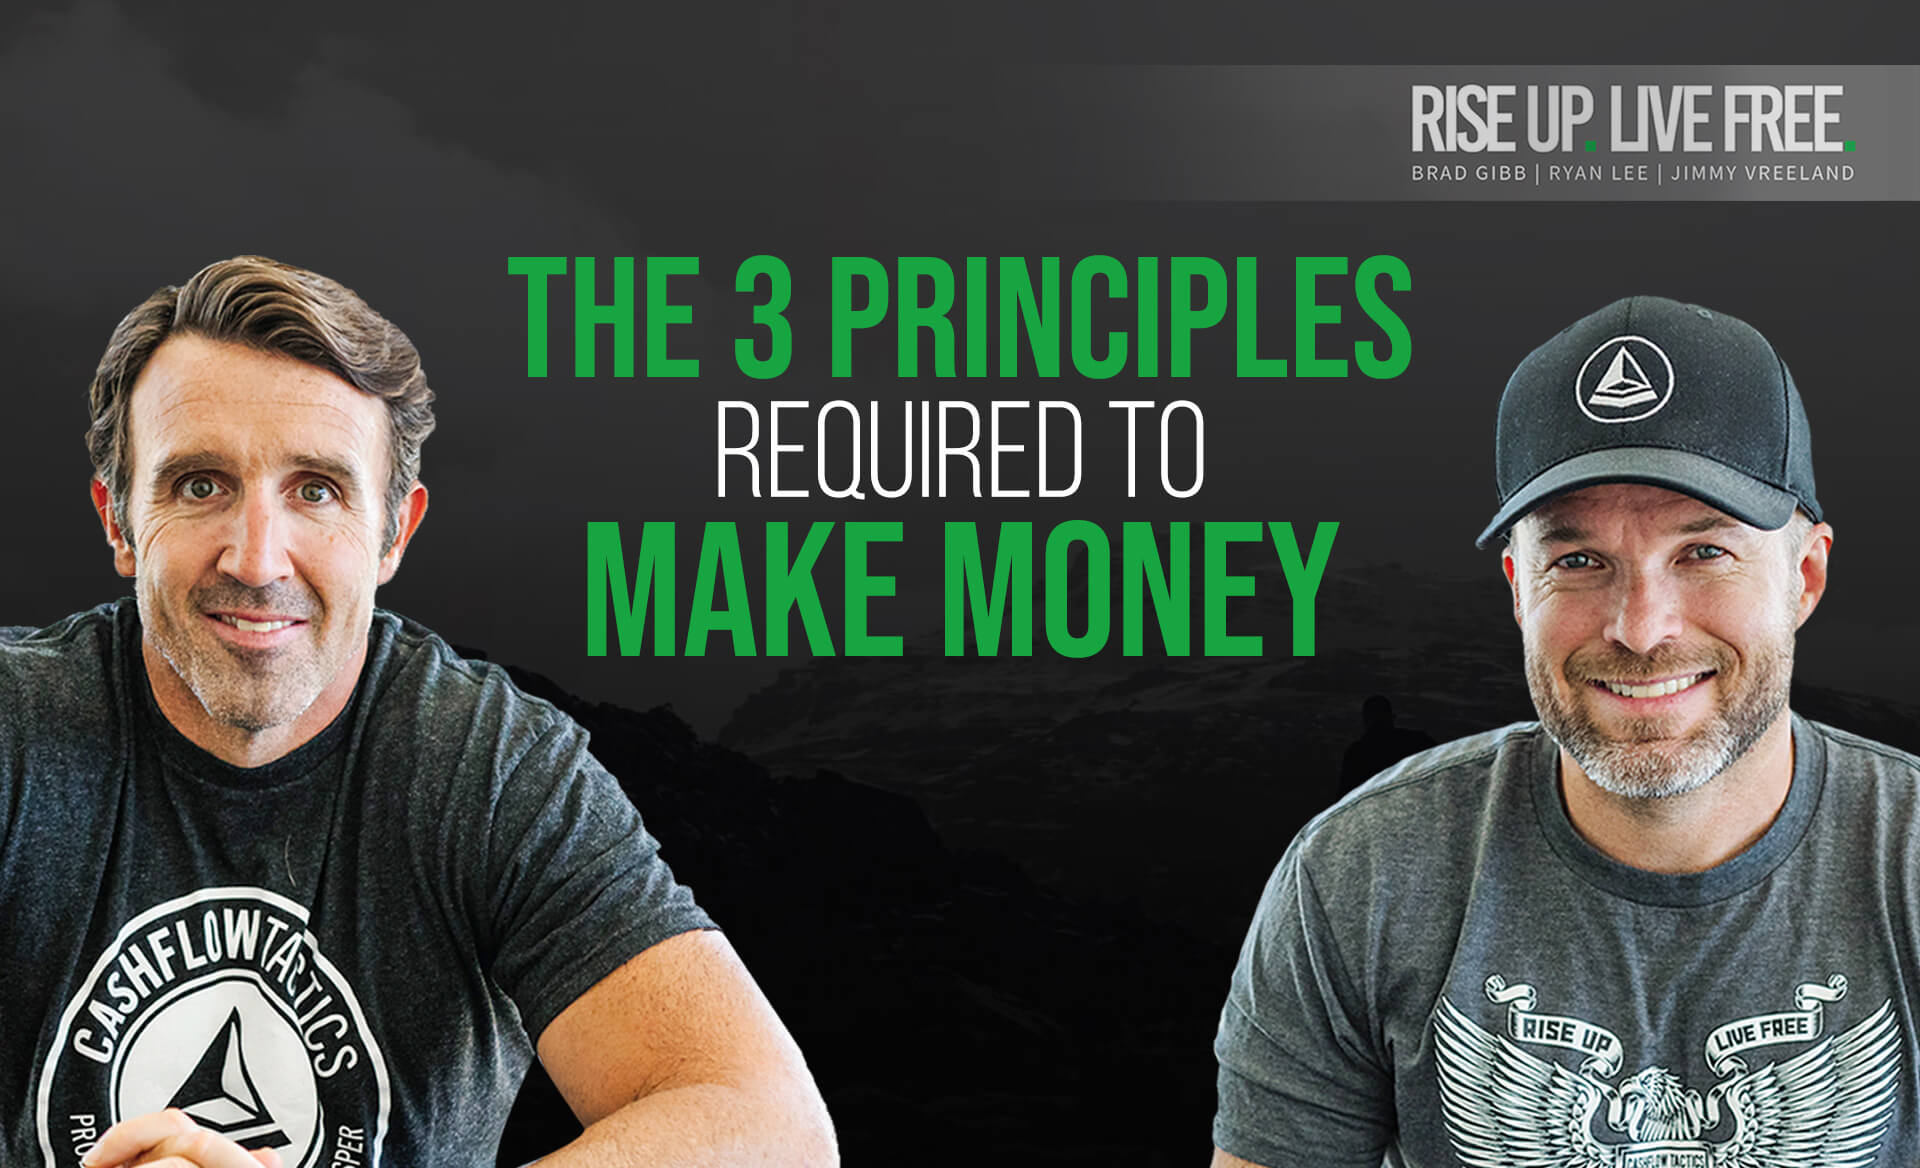 The 3 Principles Required to Make Money